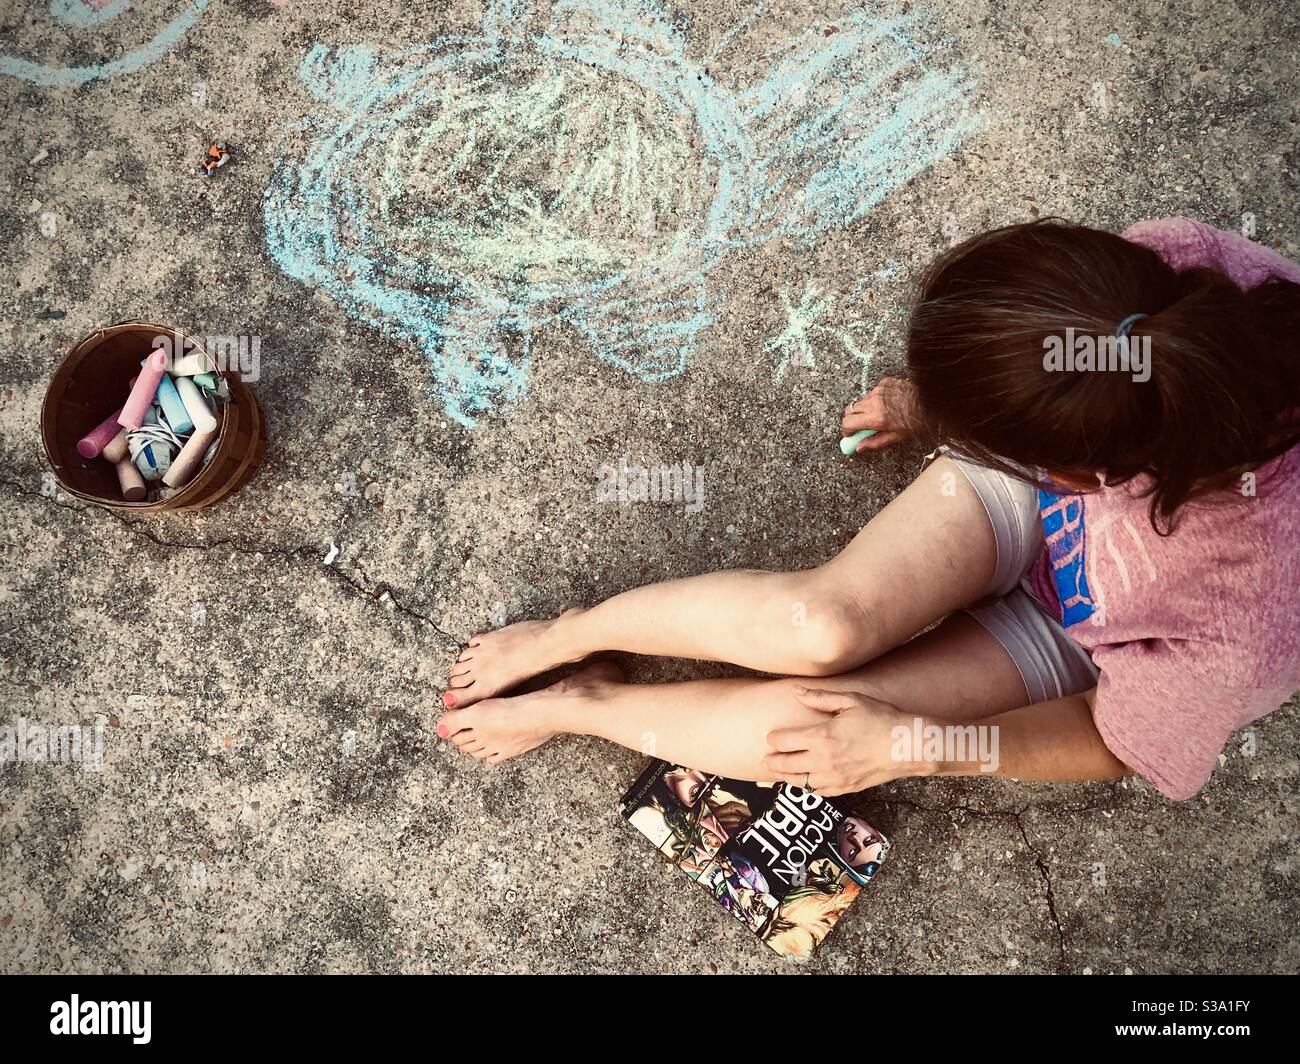 Using chalk to draw on her driveway is Holly Tippett. Photo take July 19, 2020 in Columbus, Mississippi. A book labeled “The Action Bible” rests near the bottom leg. Stock Photo